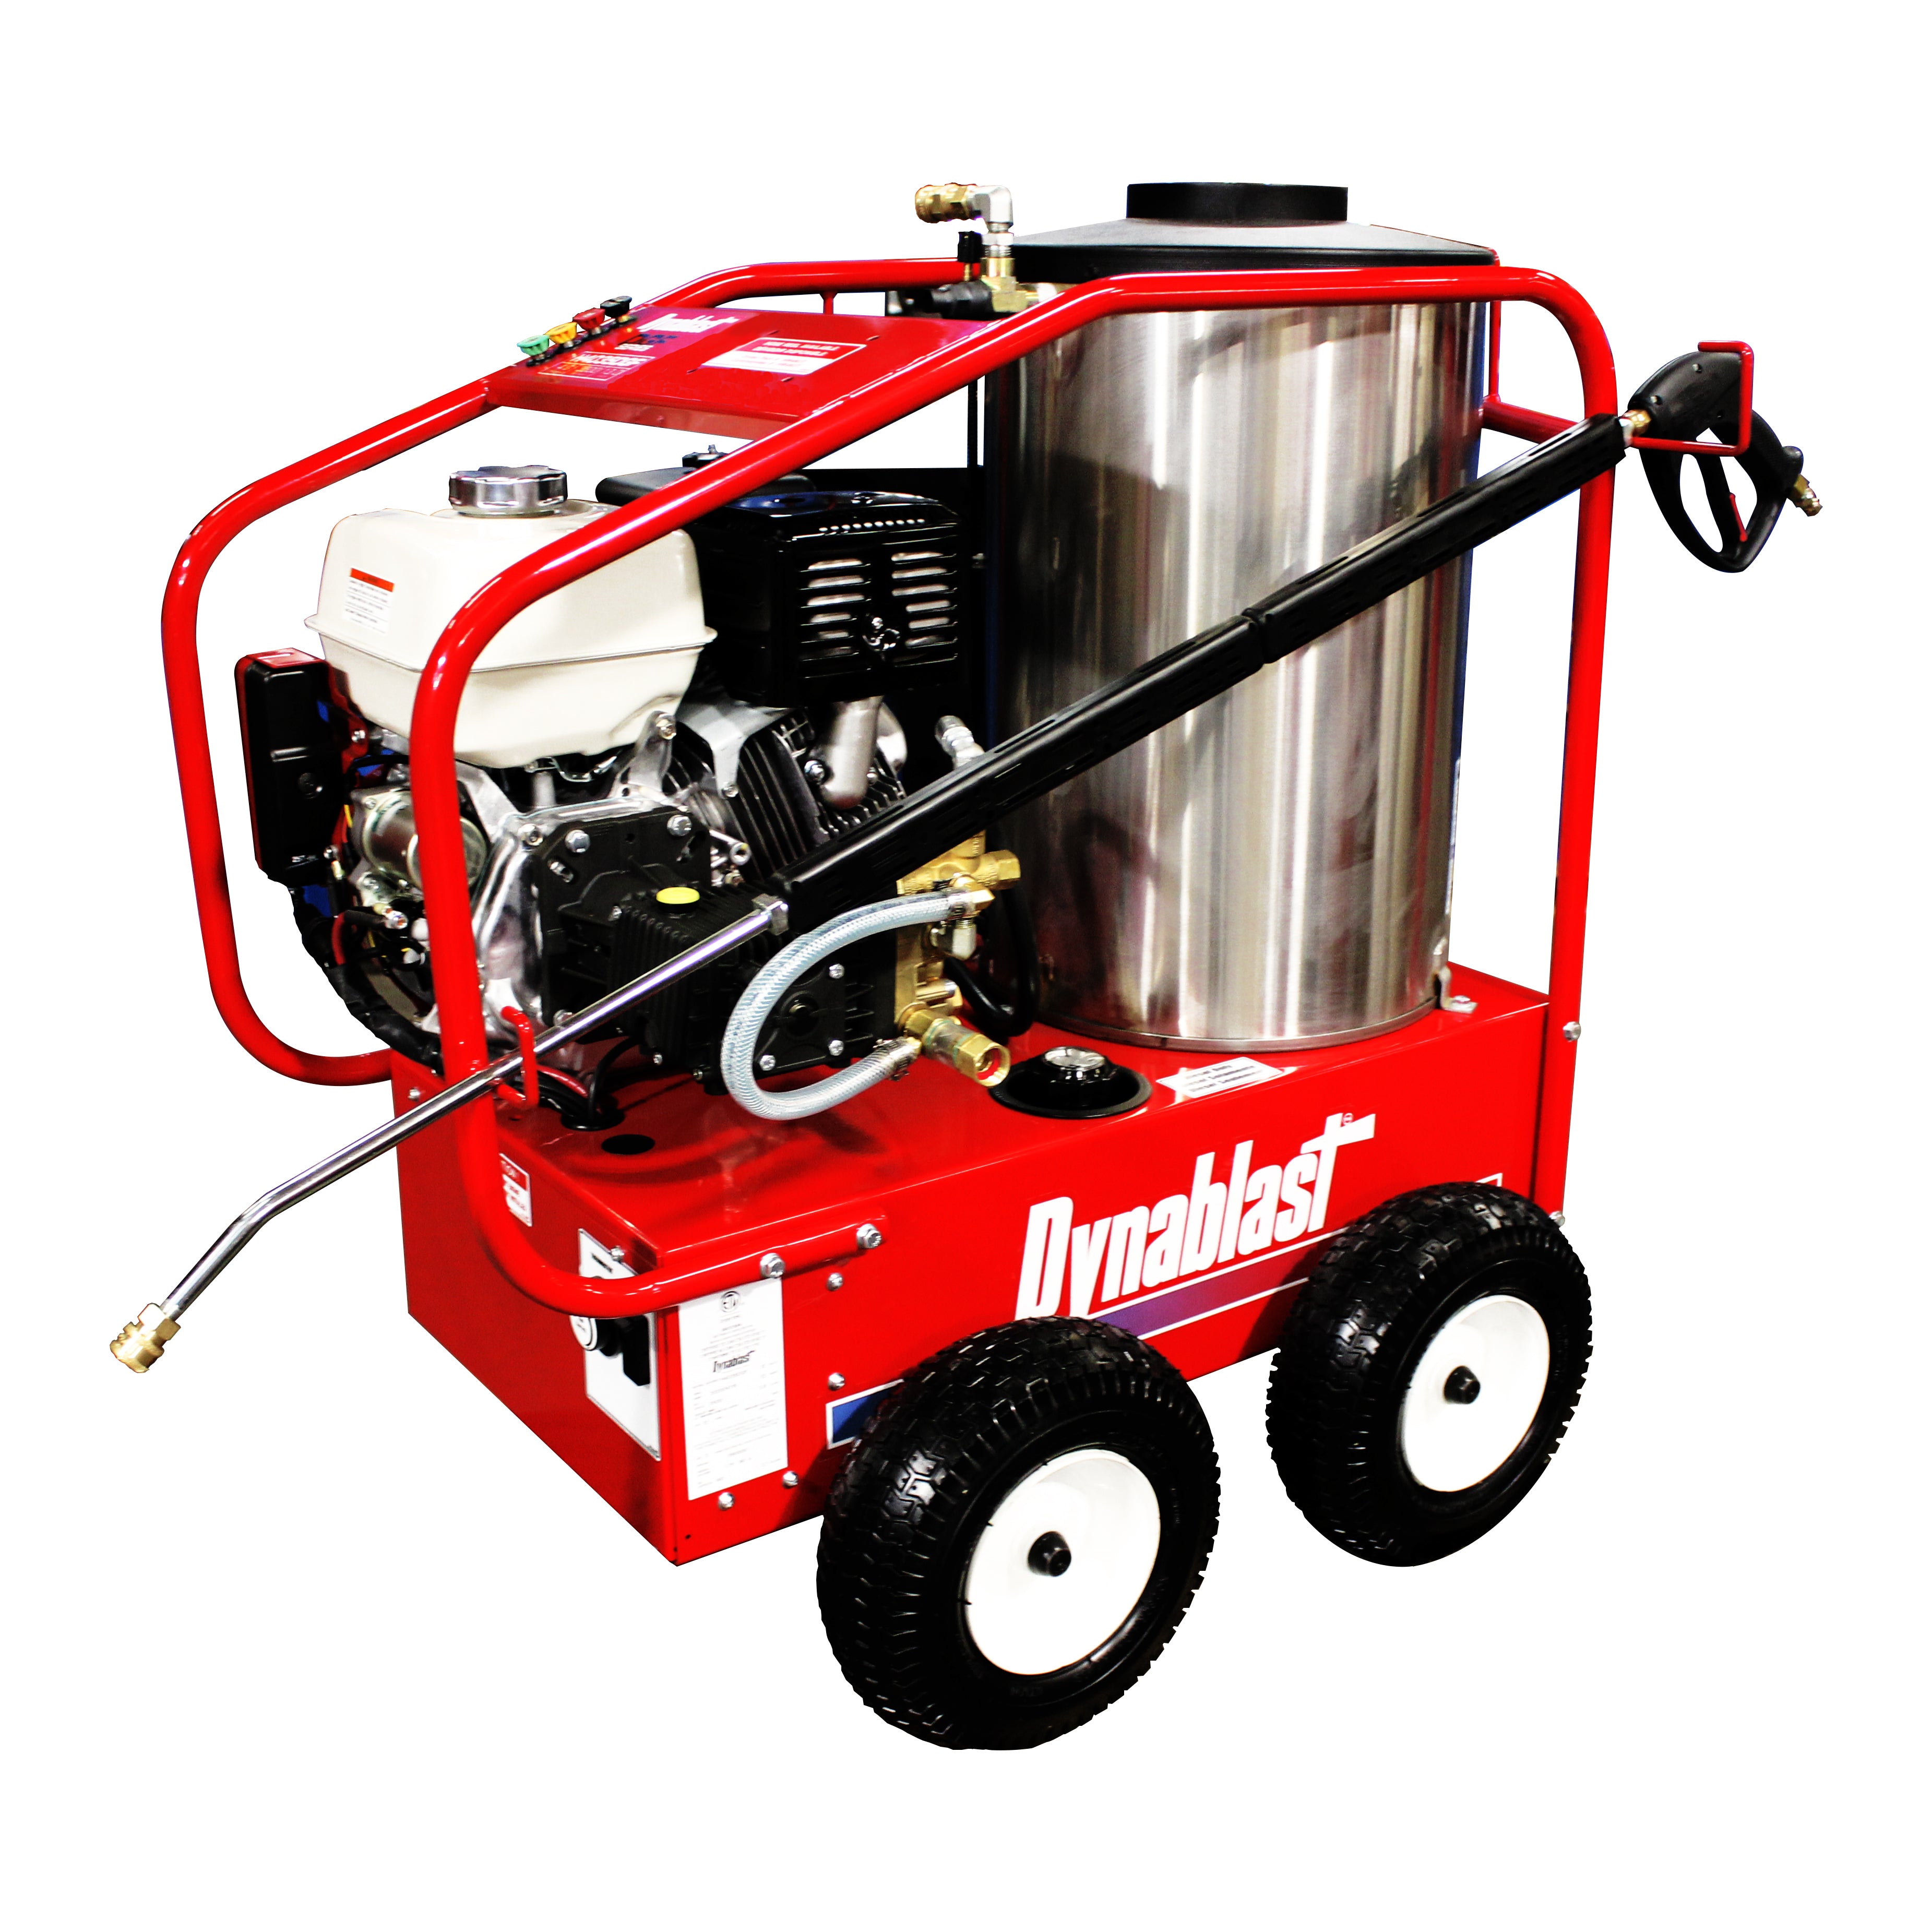 Hot Water Industrial Honda Gas Engine Fuel Oil Heated Portable Pressure Washers with Electric Start - 3500 PSI - 4.0 GPM